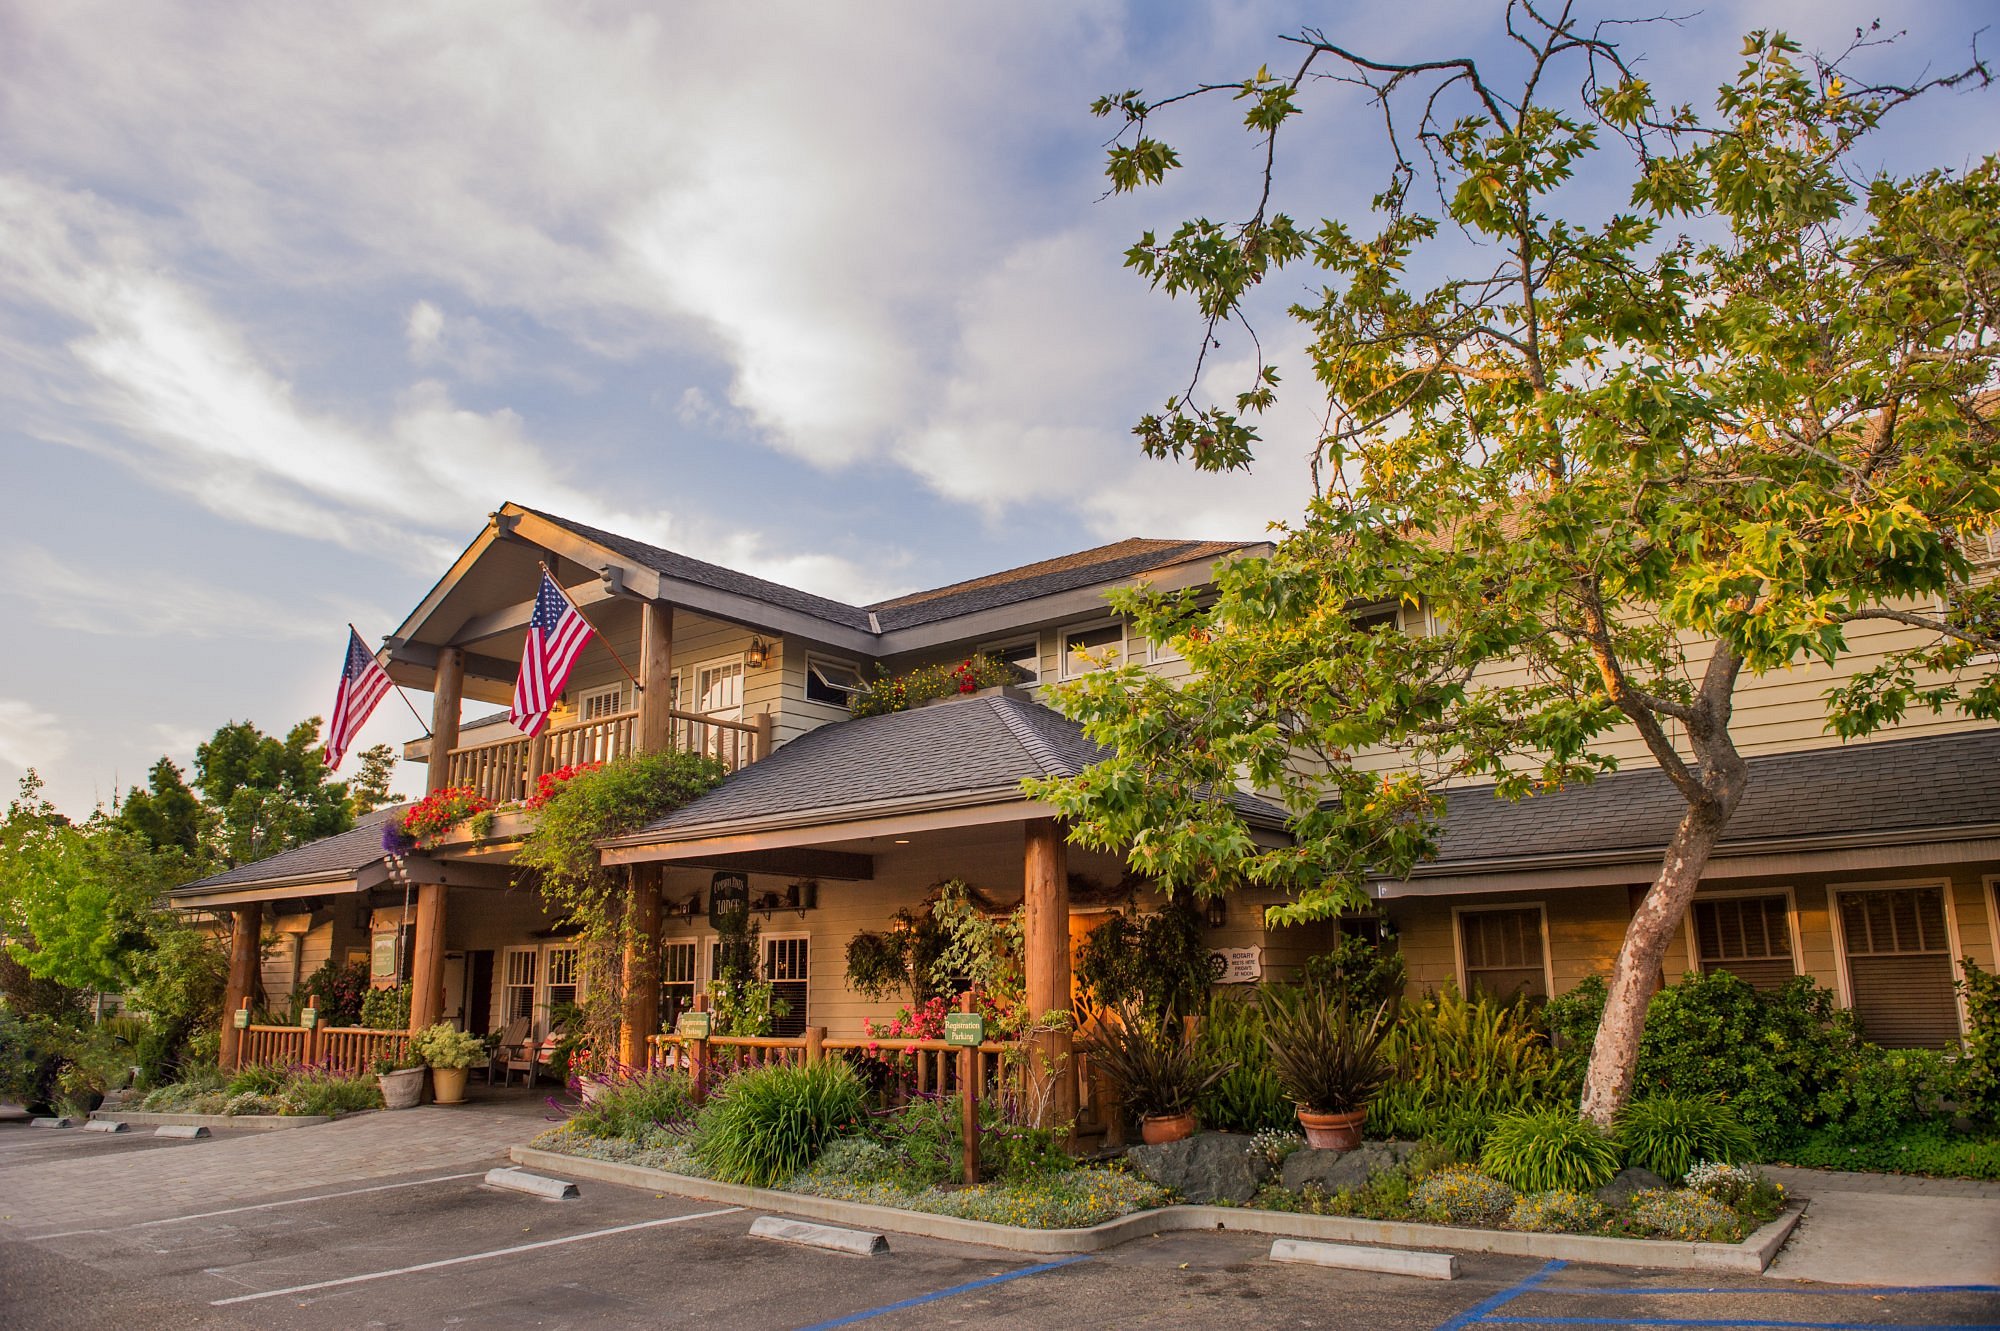 CAMBRIA PINES LODGE Updated 2022 Prices & Hotel Reviews (CA)